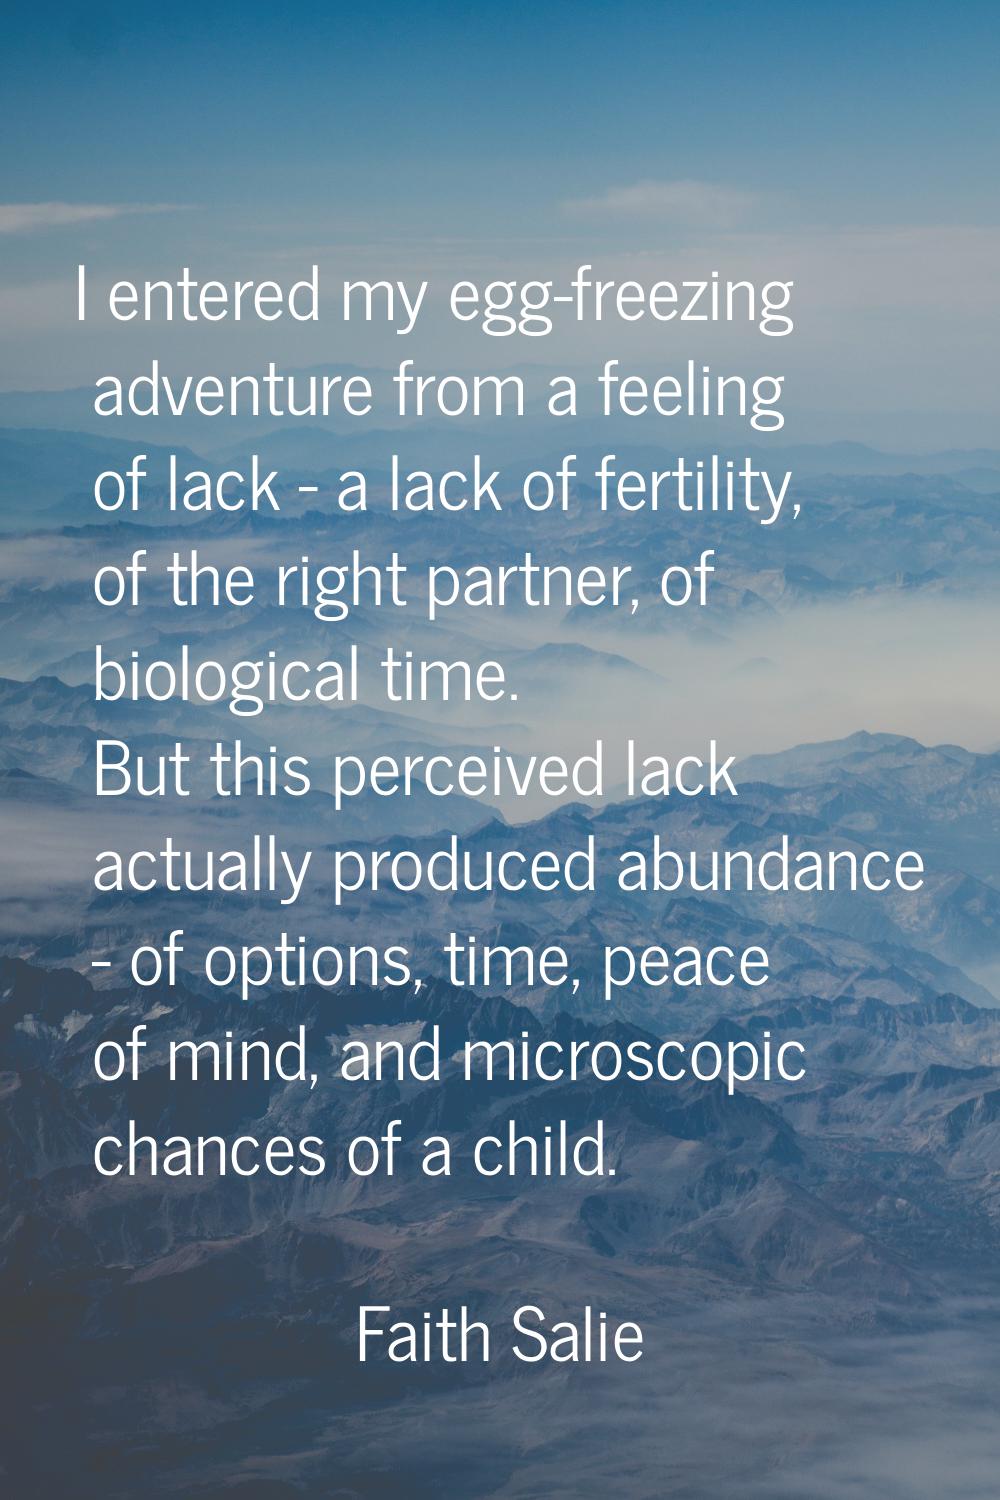 I entered my egg-freezing adventure from a feeling of lack - a lack of fertility, of the right part